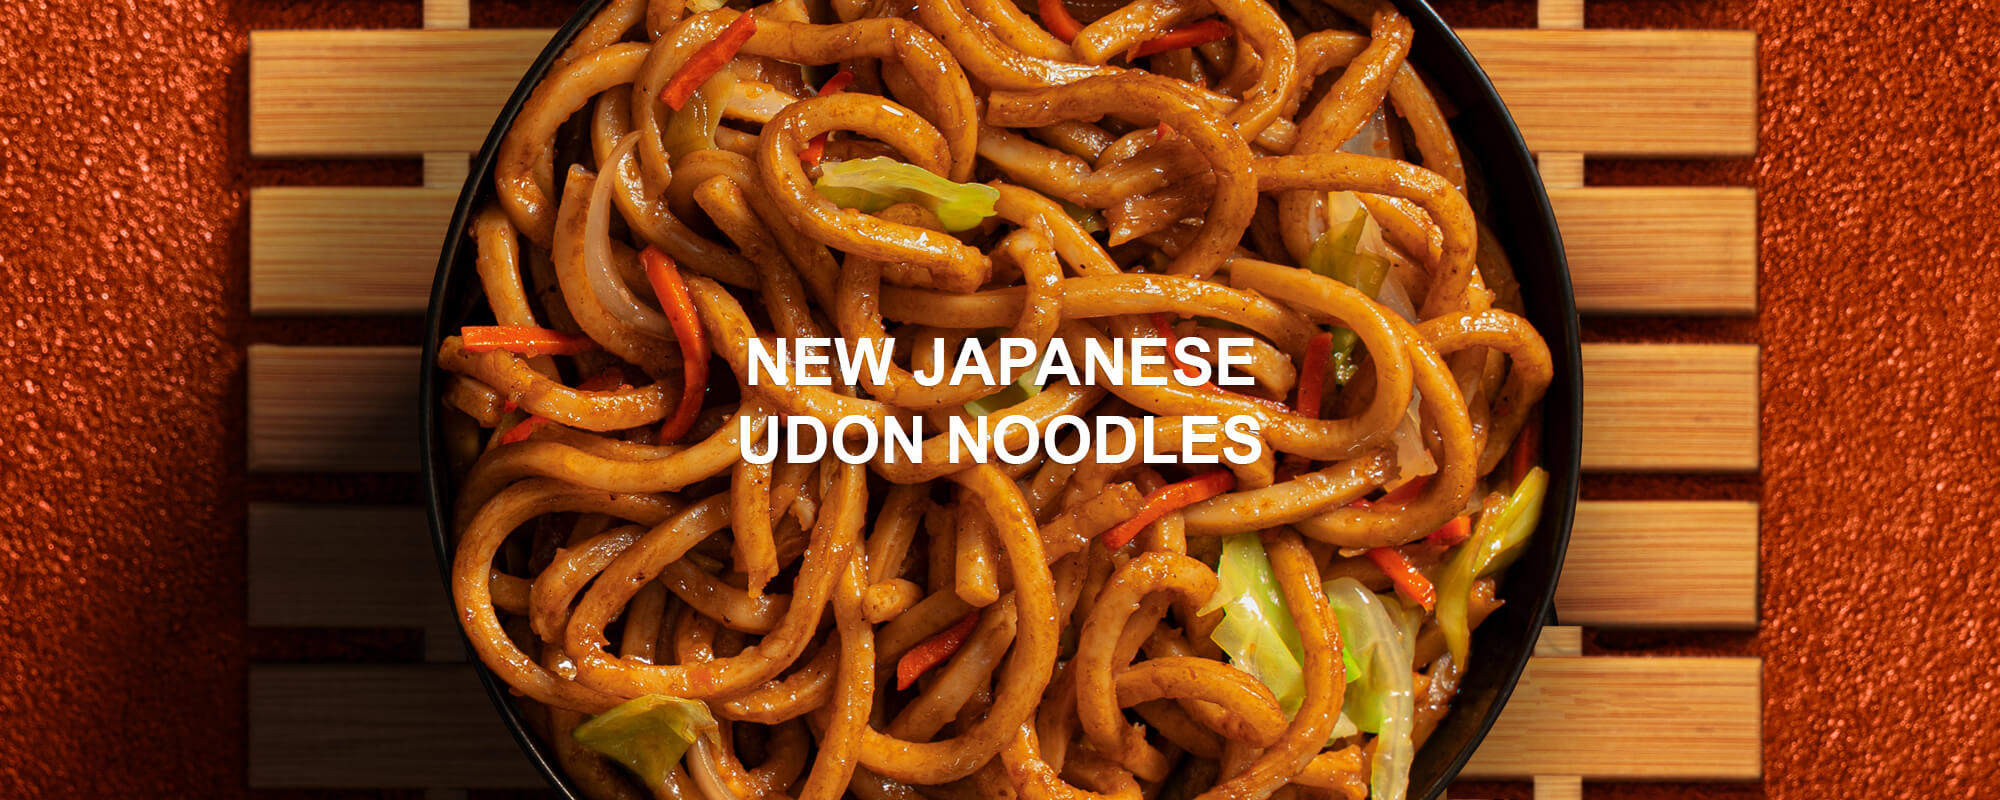 NEW JAPANESE UDON NOODLES